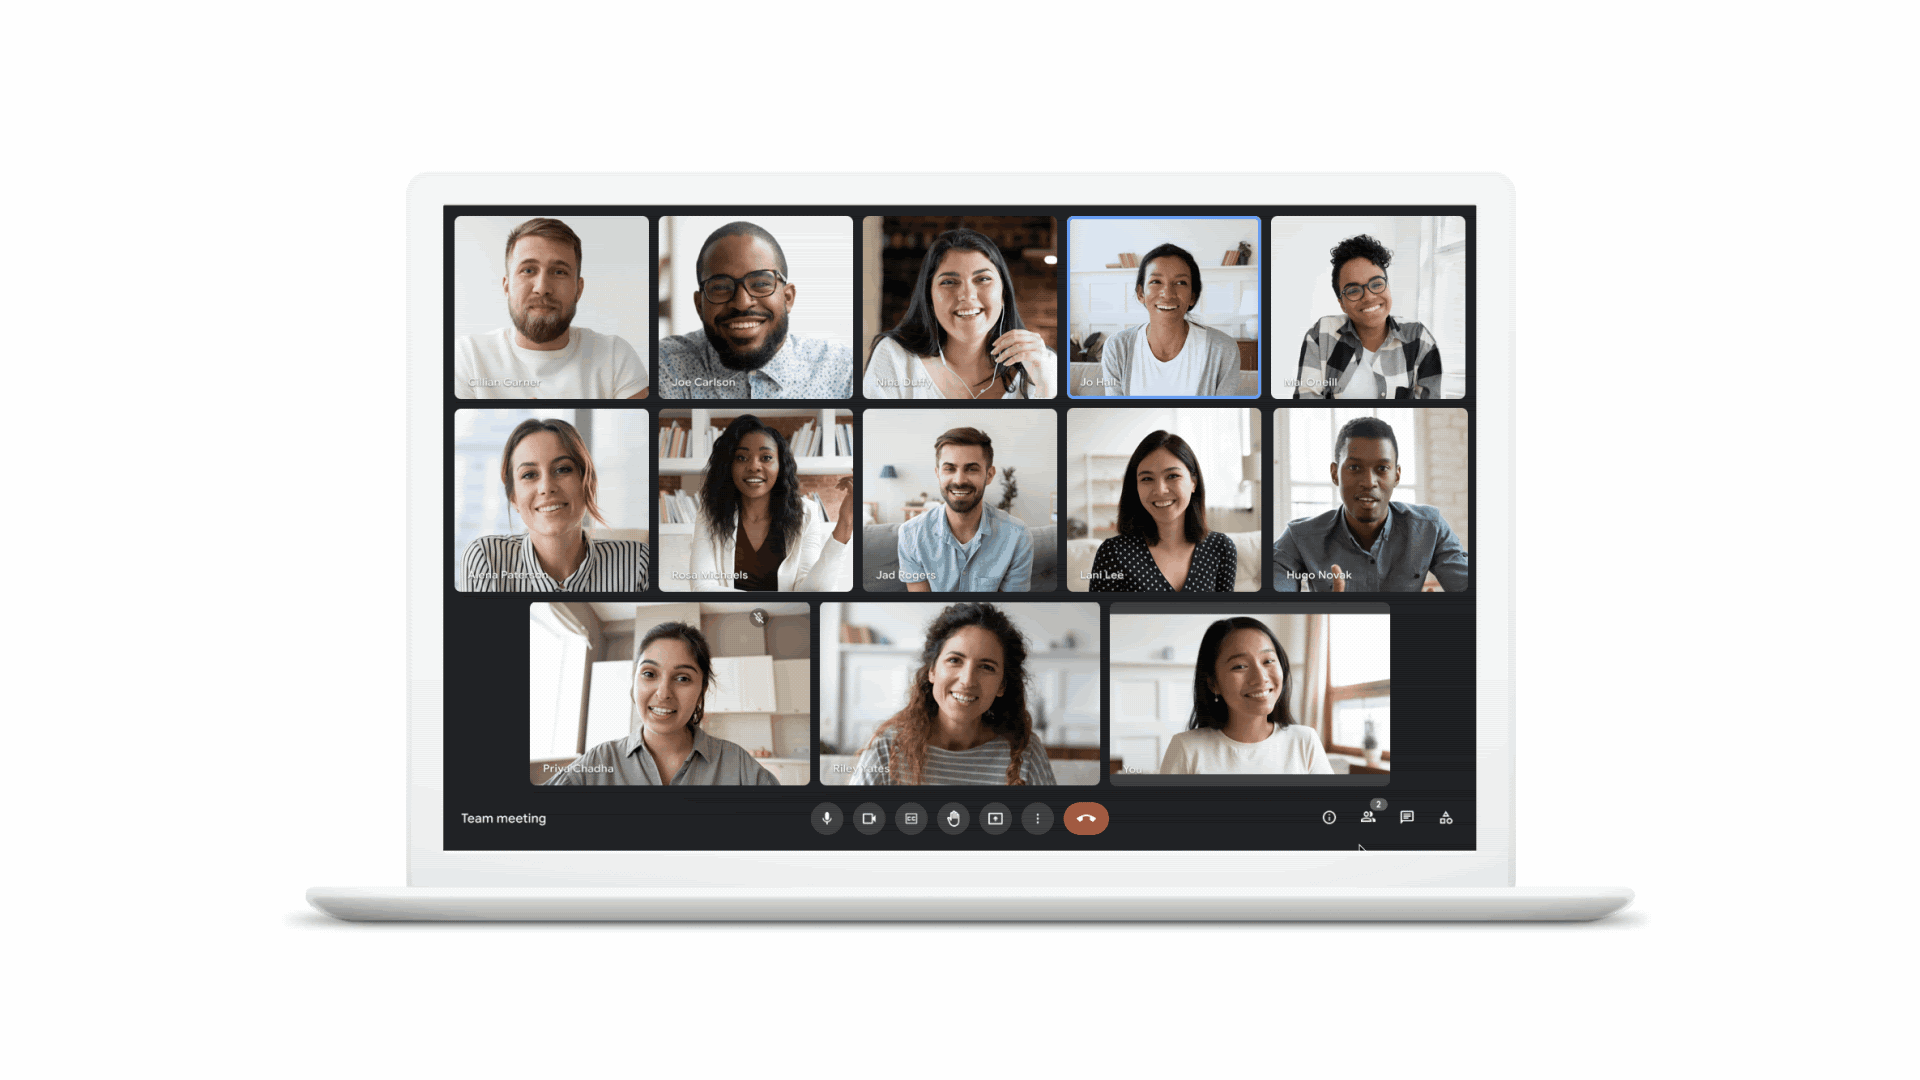 Google is making collaboration more immersive for remote workers